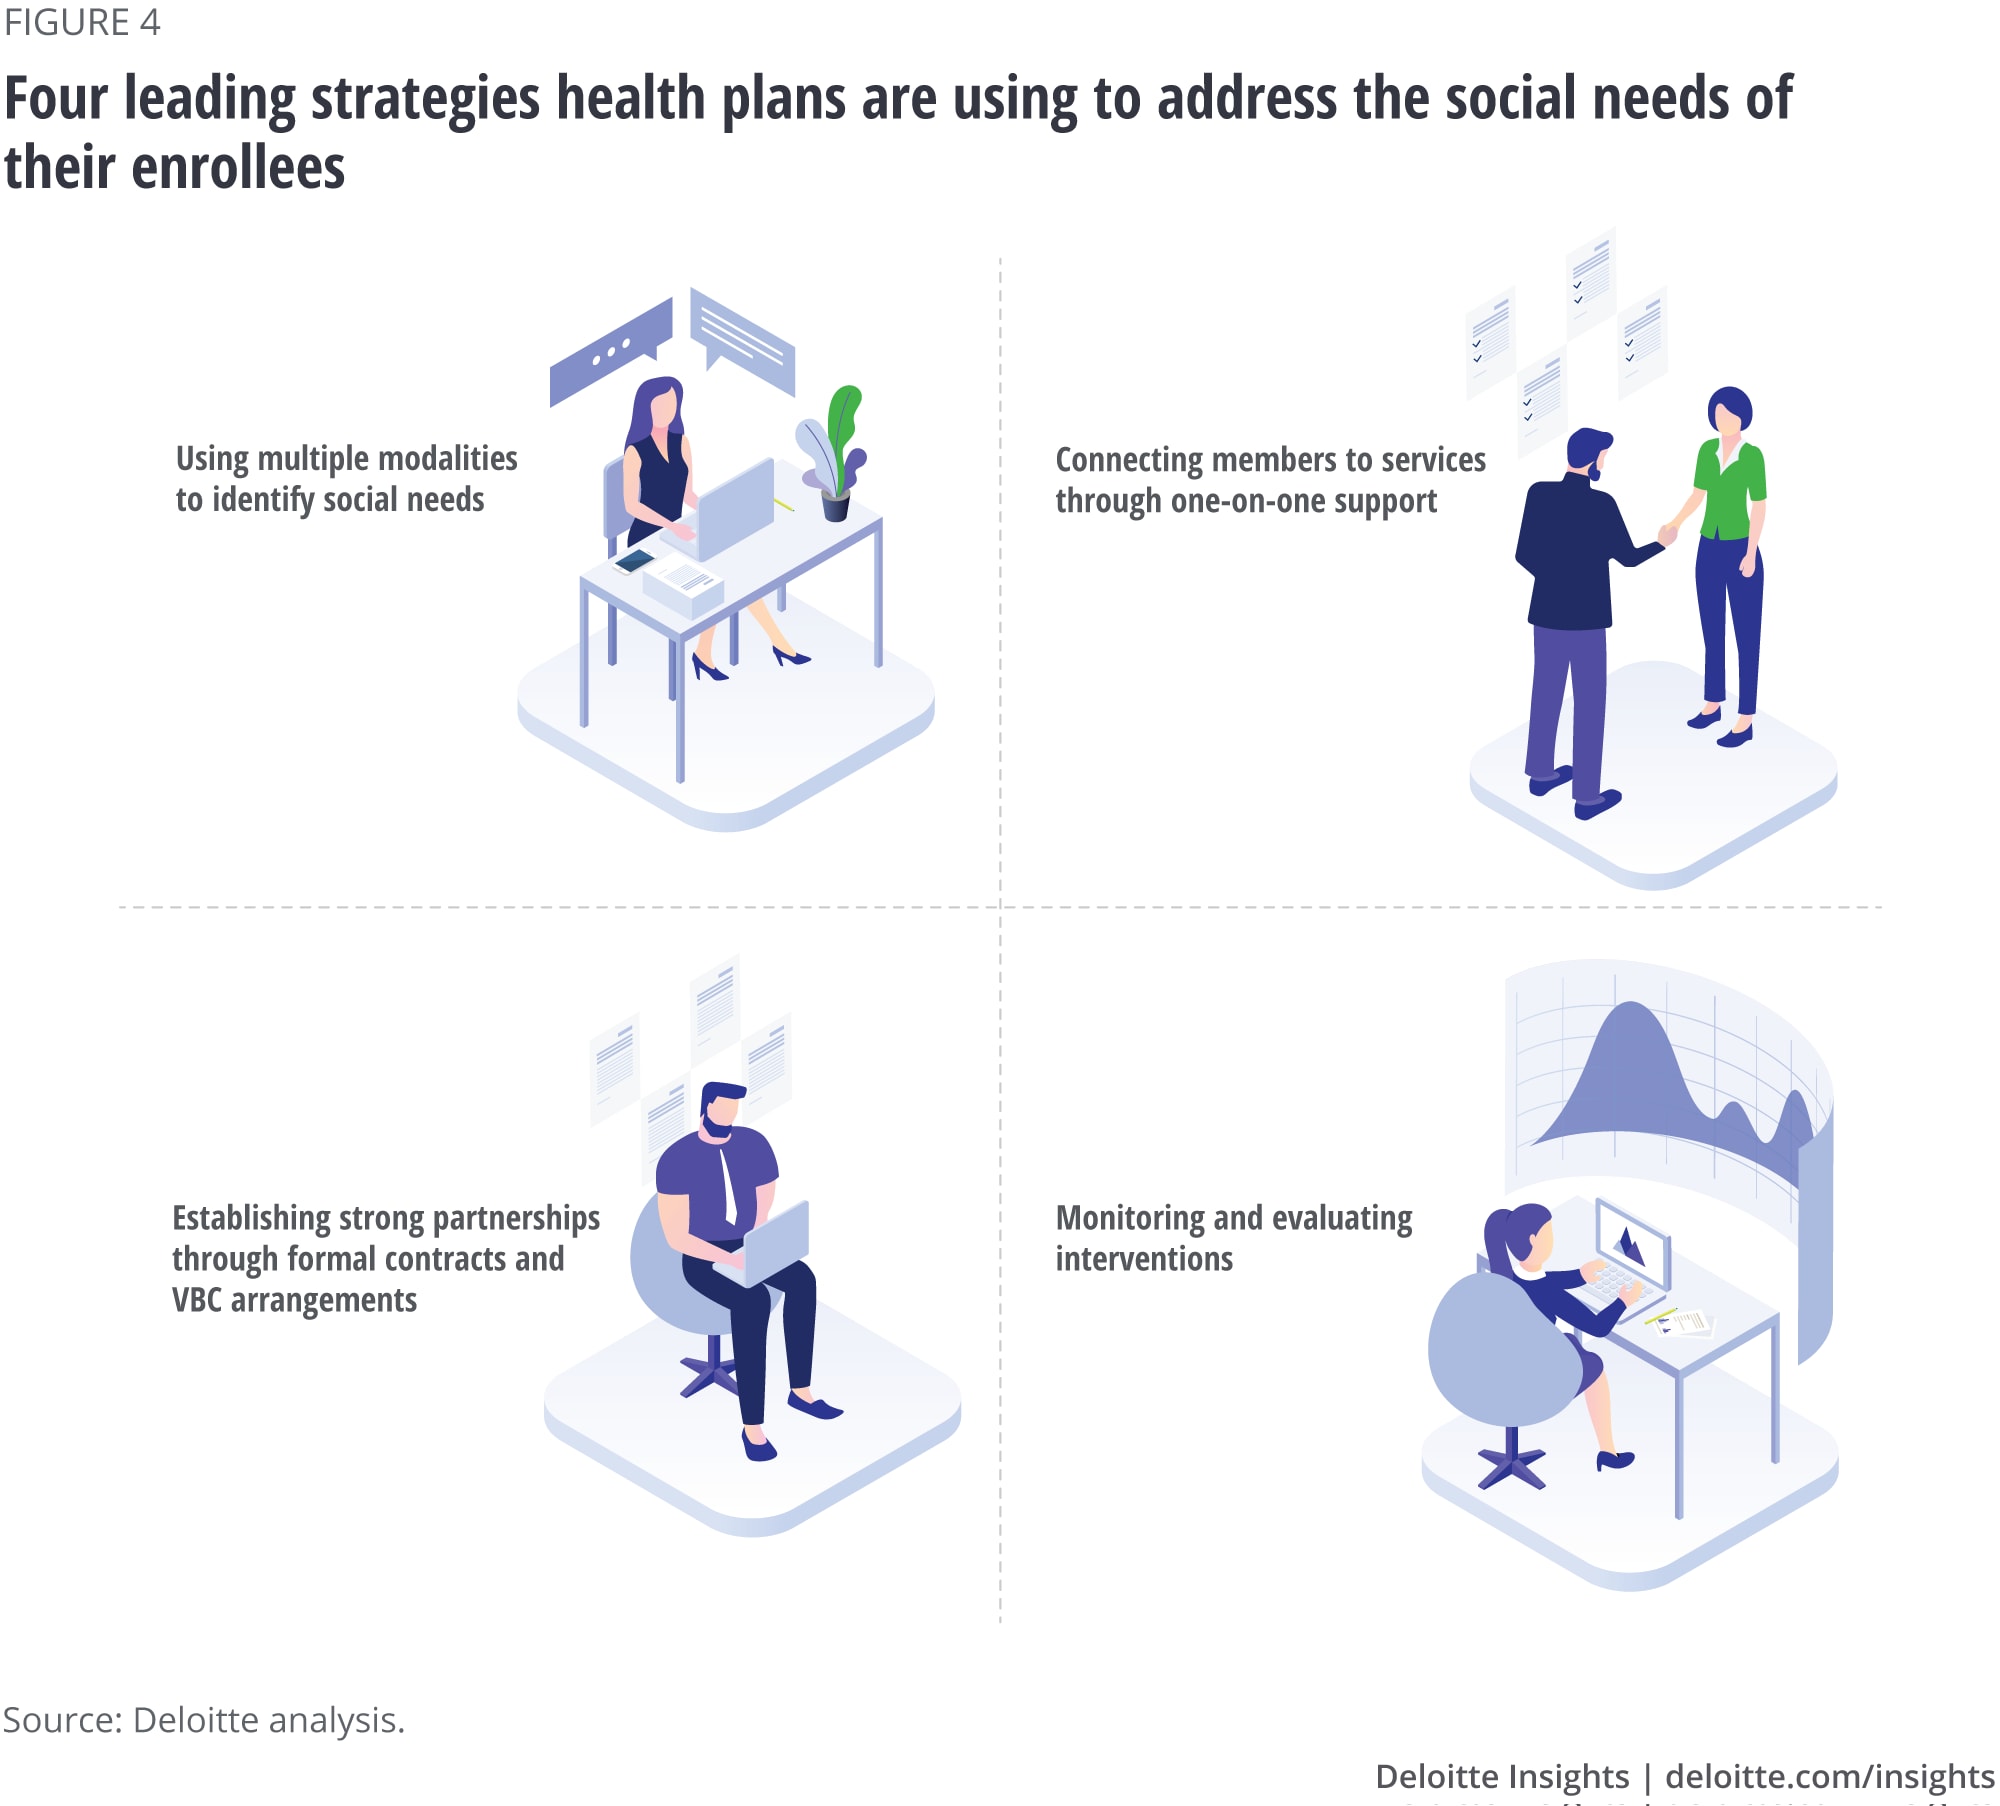 Four leading strategies health plans are using to address the social needs of their enrollees